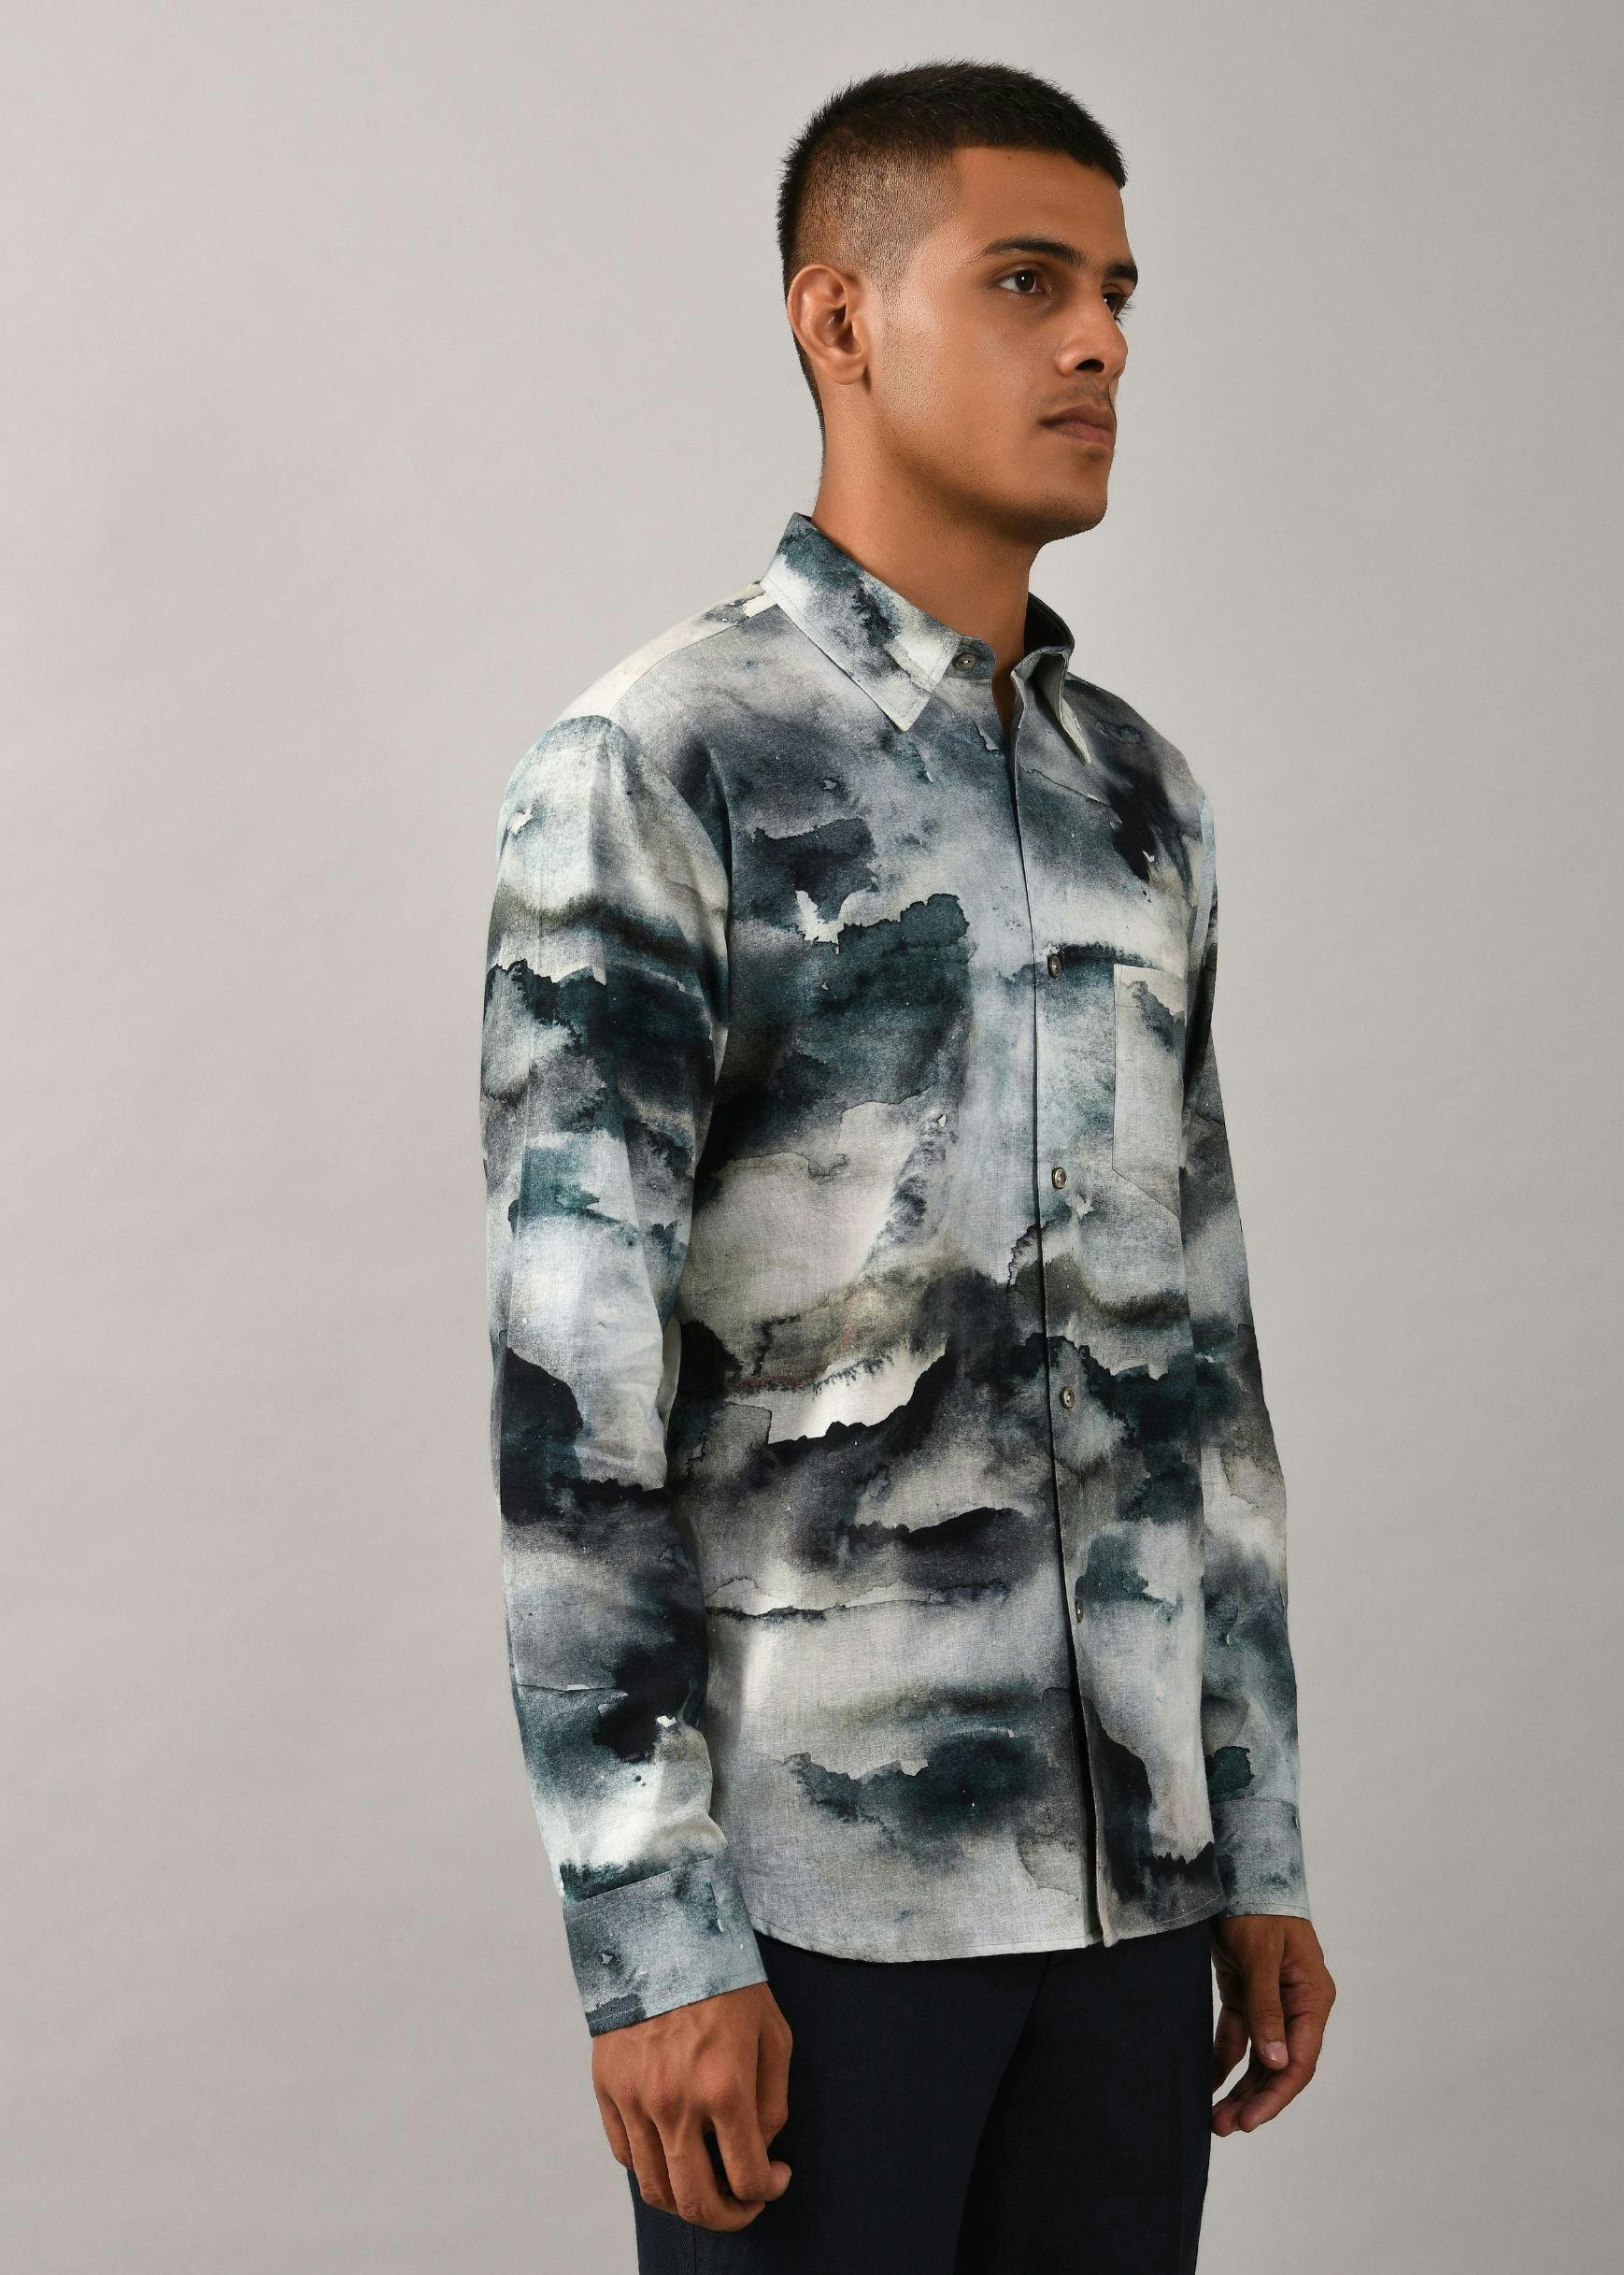 Camouflaged Clouds Print Shirt, a product by Country Made